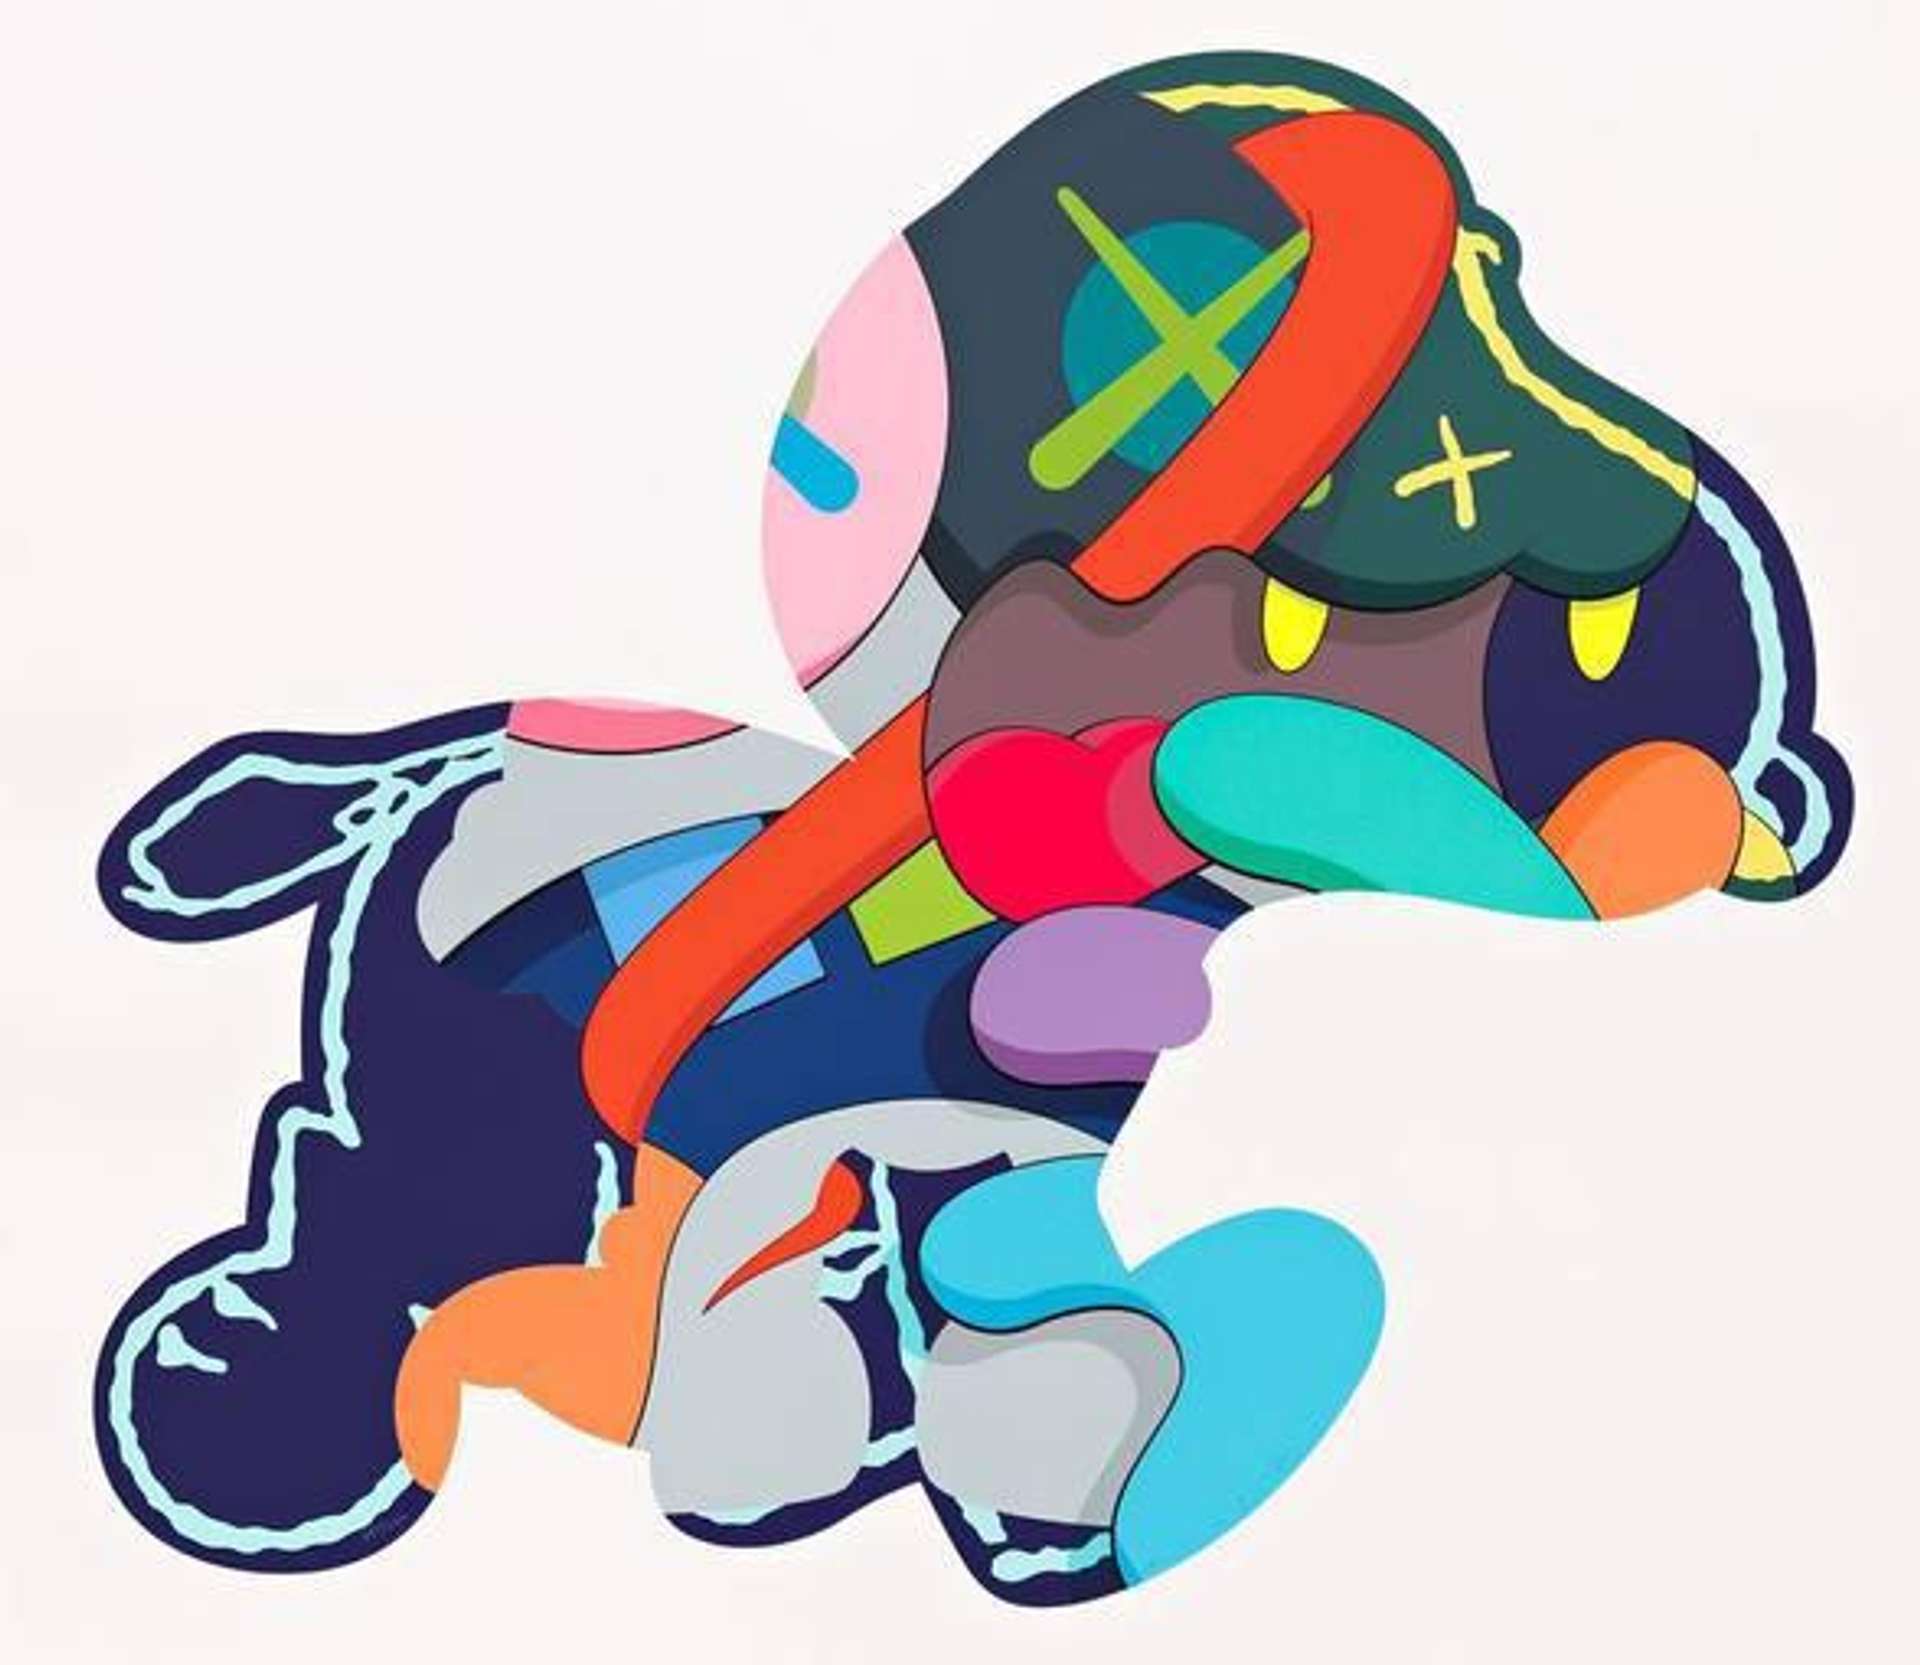 No-One's Homer, Stay Steady, The Things That Comfort by KAWS